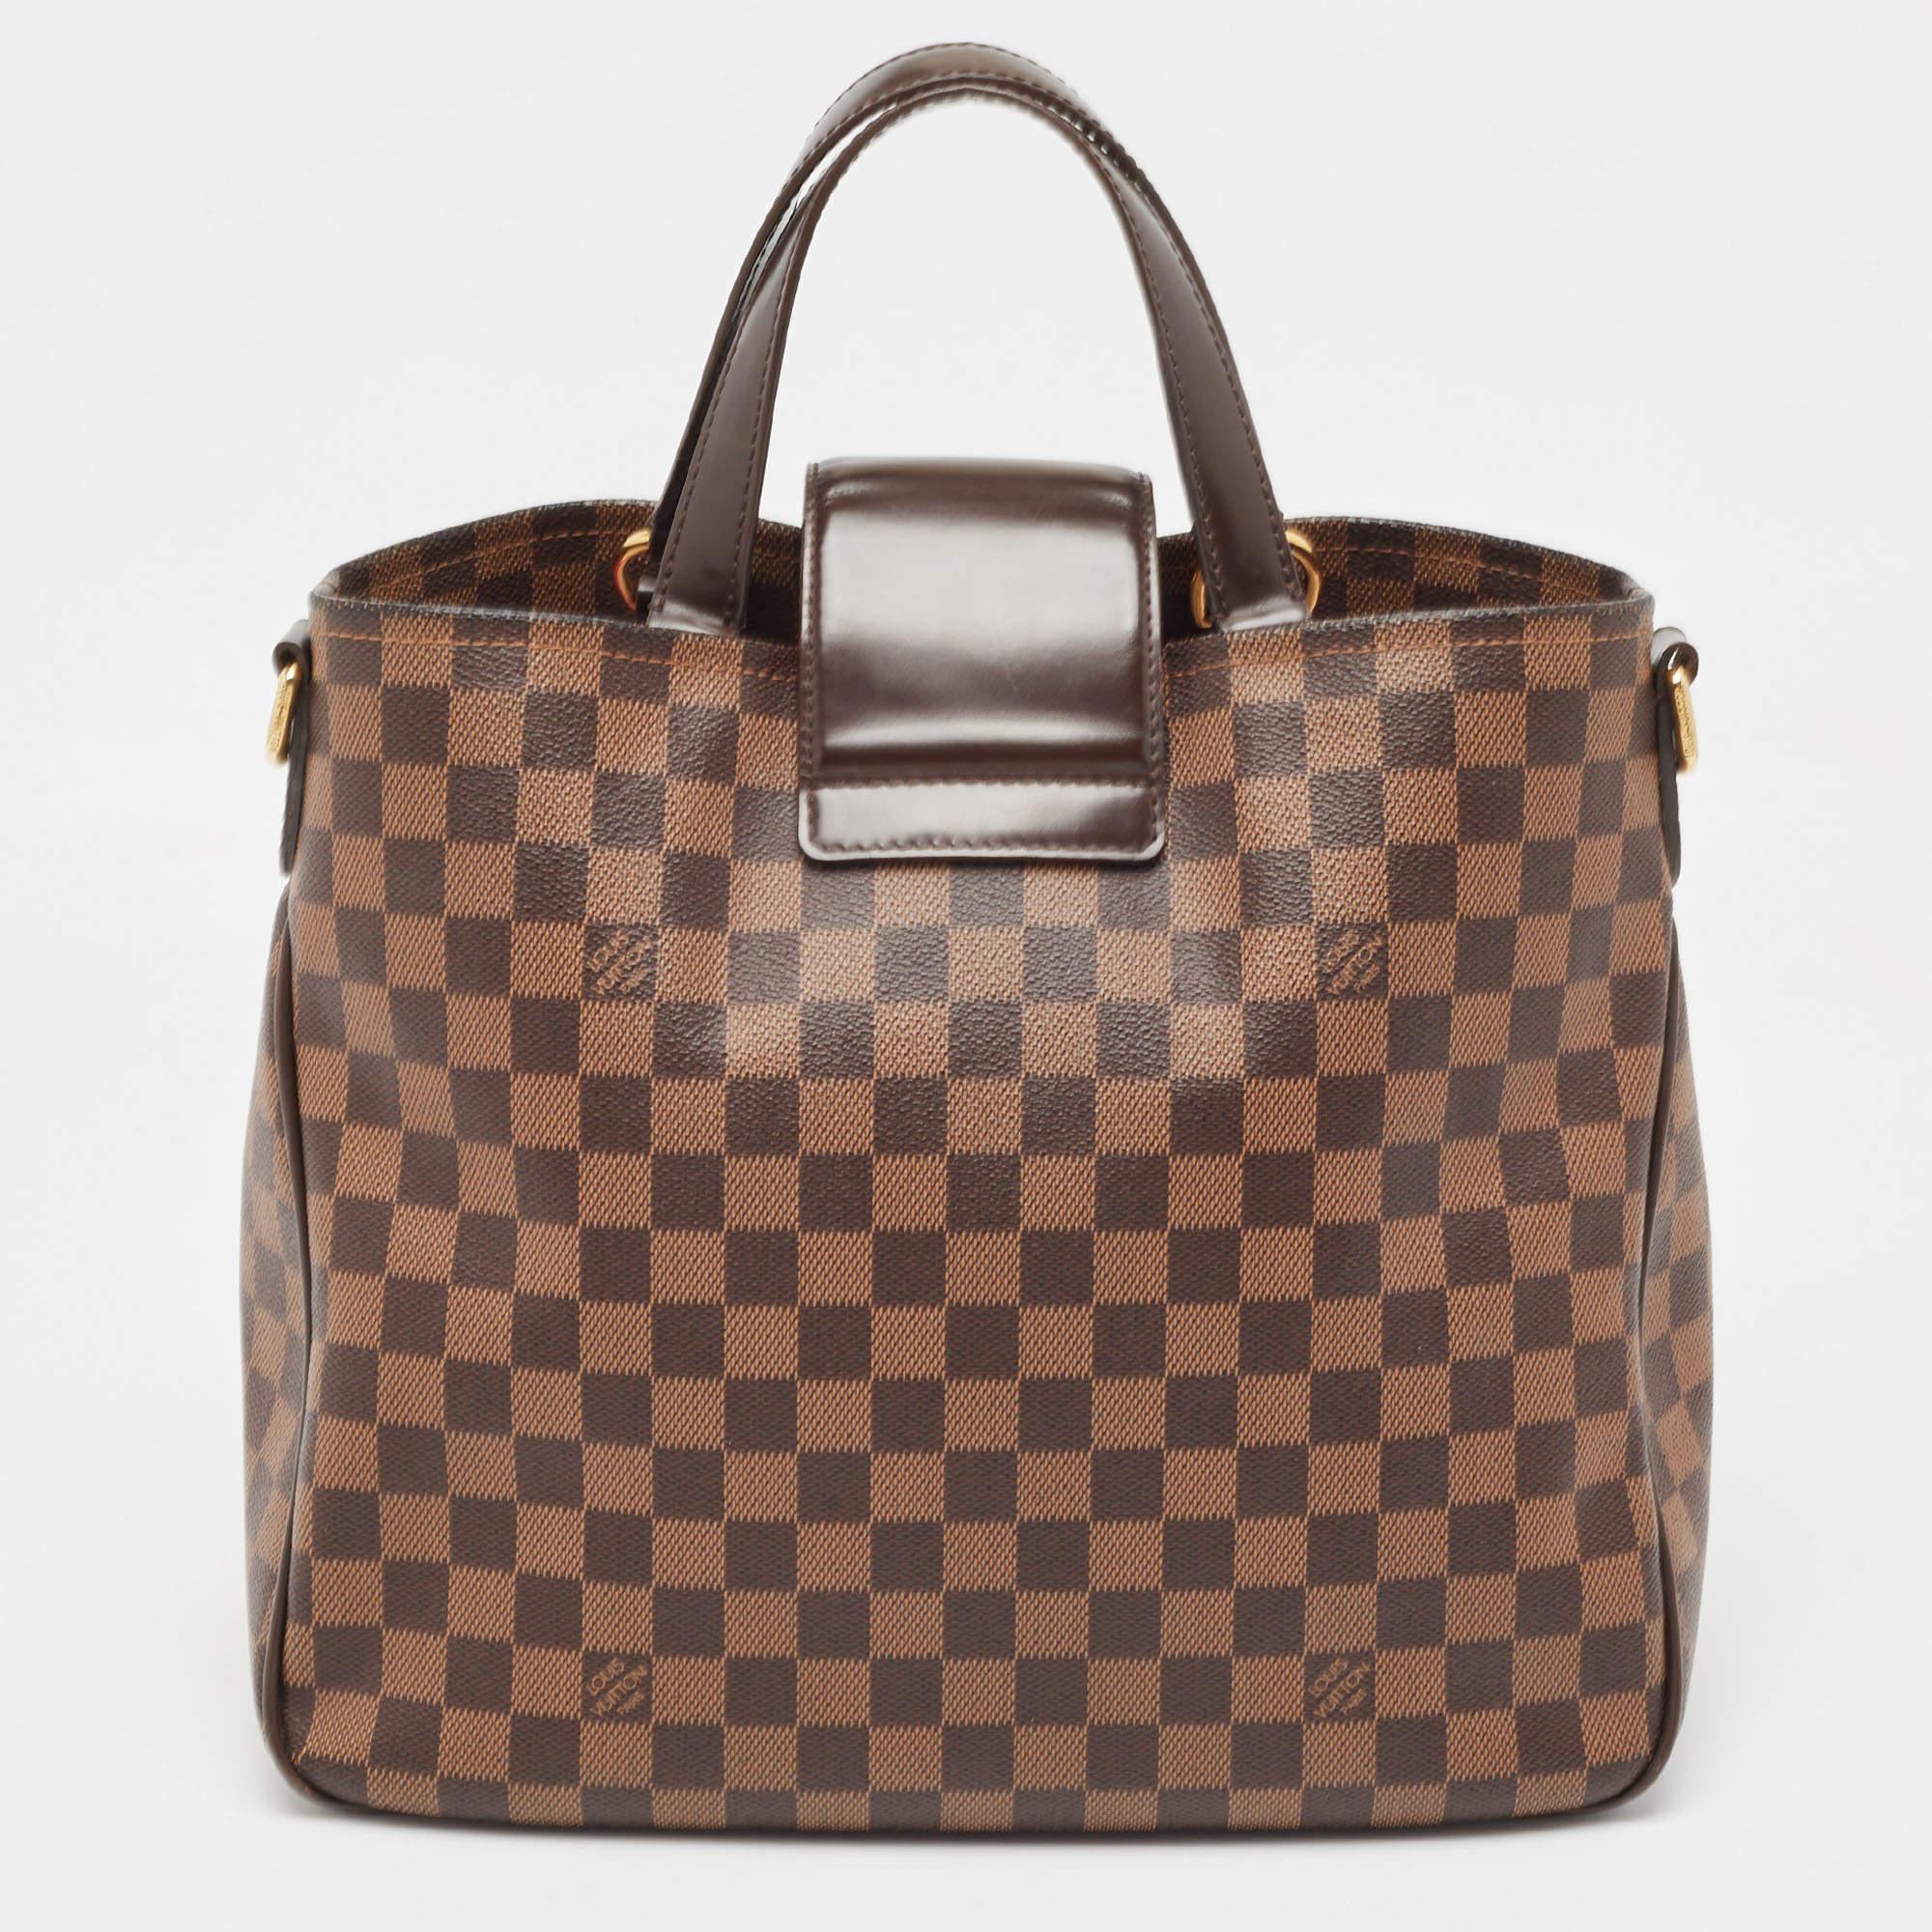 Combining Louis Vuitton’s rich heritage with exquisite craftsmanship, this Cabas Rosebery Bag is one you shouldn't miss. Made from signature Damier Ebene canvas, this fabulous style is finished with leather trims and two handles. The metal lock at